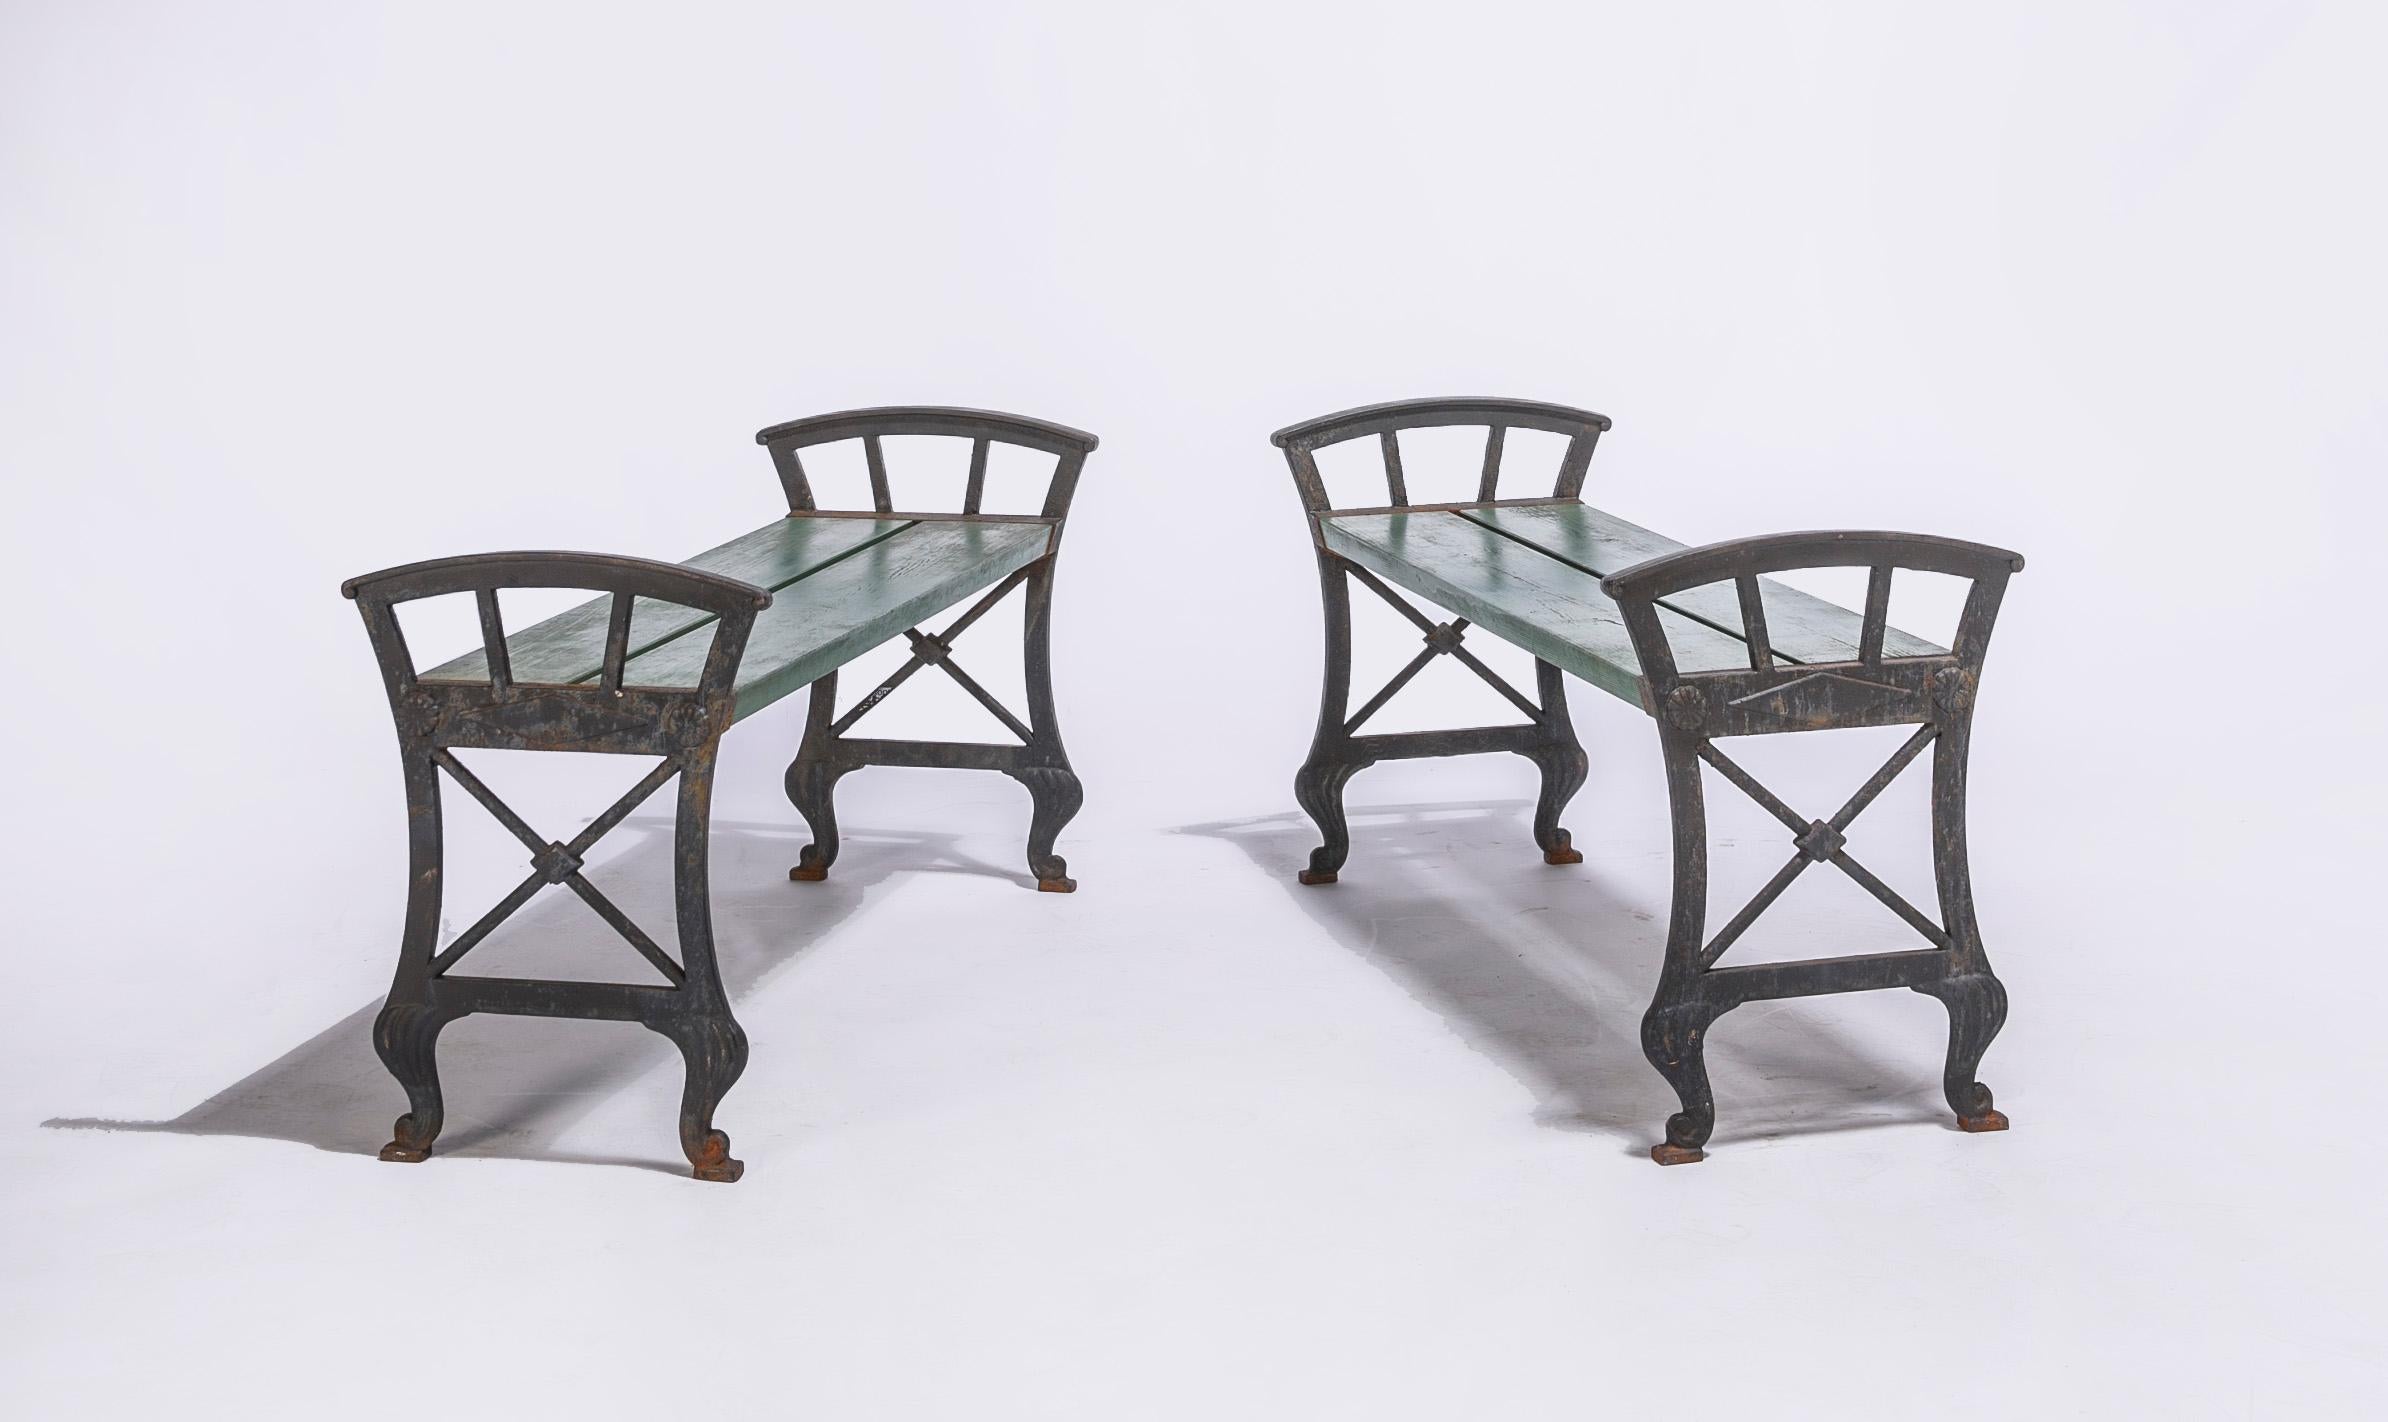 Pair of 1920s cast iron and painted wood Swedish outdoor benches by Folke Bensow, circa 1920s.

Some wear and patina to painted wood surfaces.